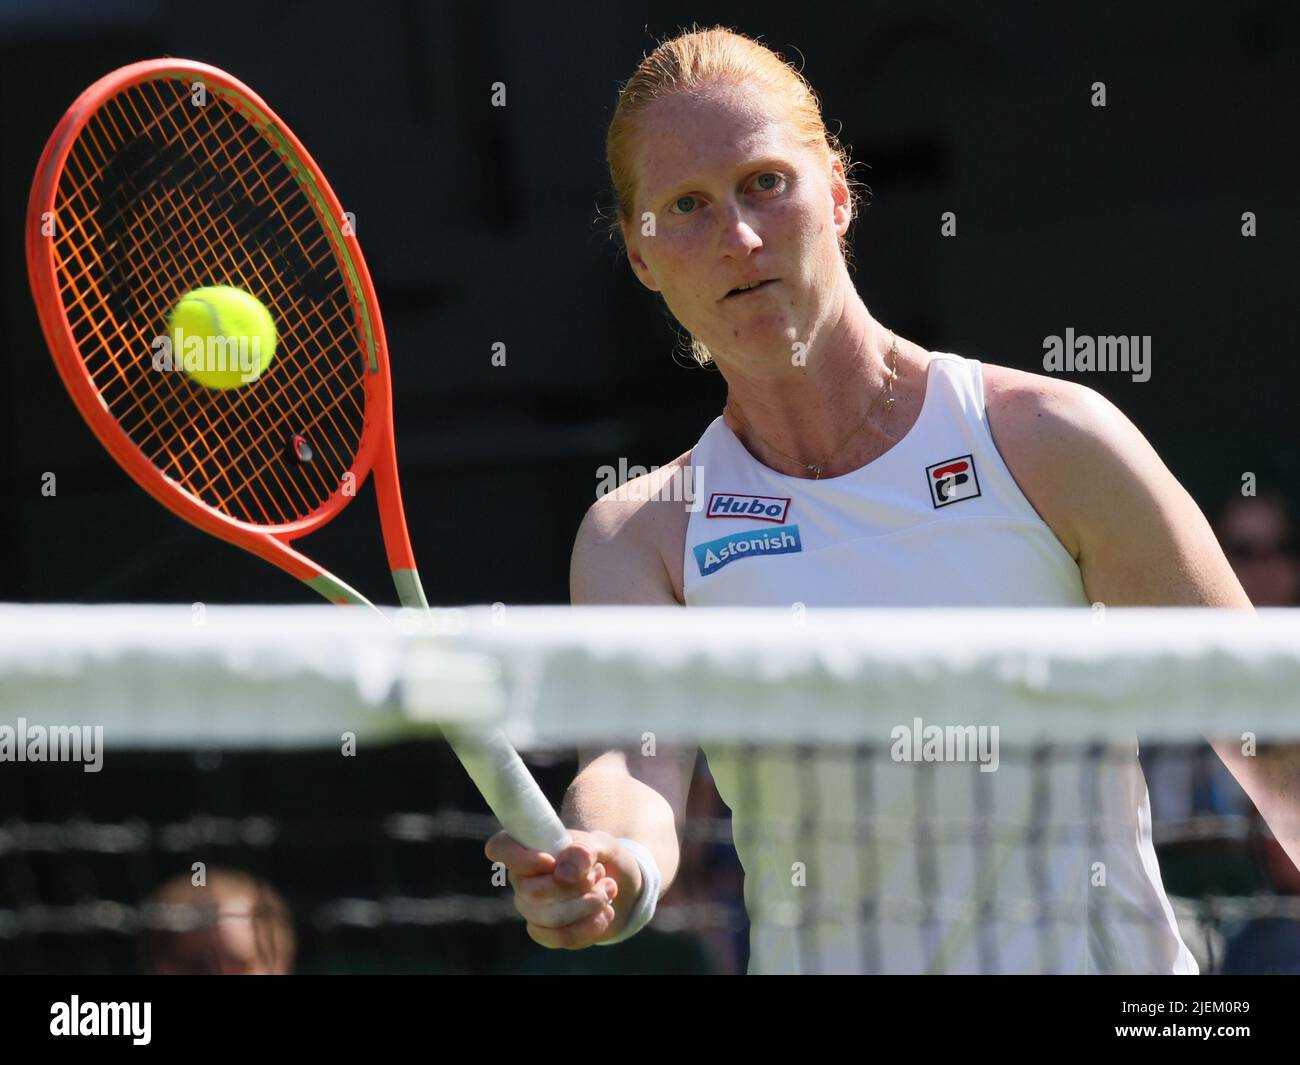 Belgian Alison Van Uytvanck pictured in action during a first round game in the womens singles tournament between Belgian Van Uytvanck (WTA 46) and Great-Britains Raducanu (WTA 11) at the 2022 Wimbledon